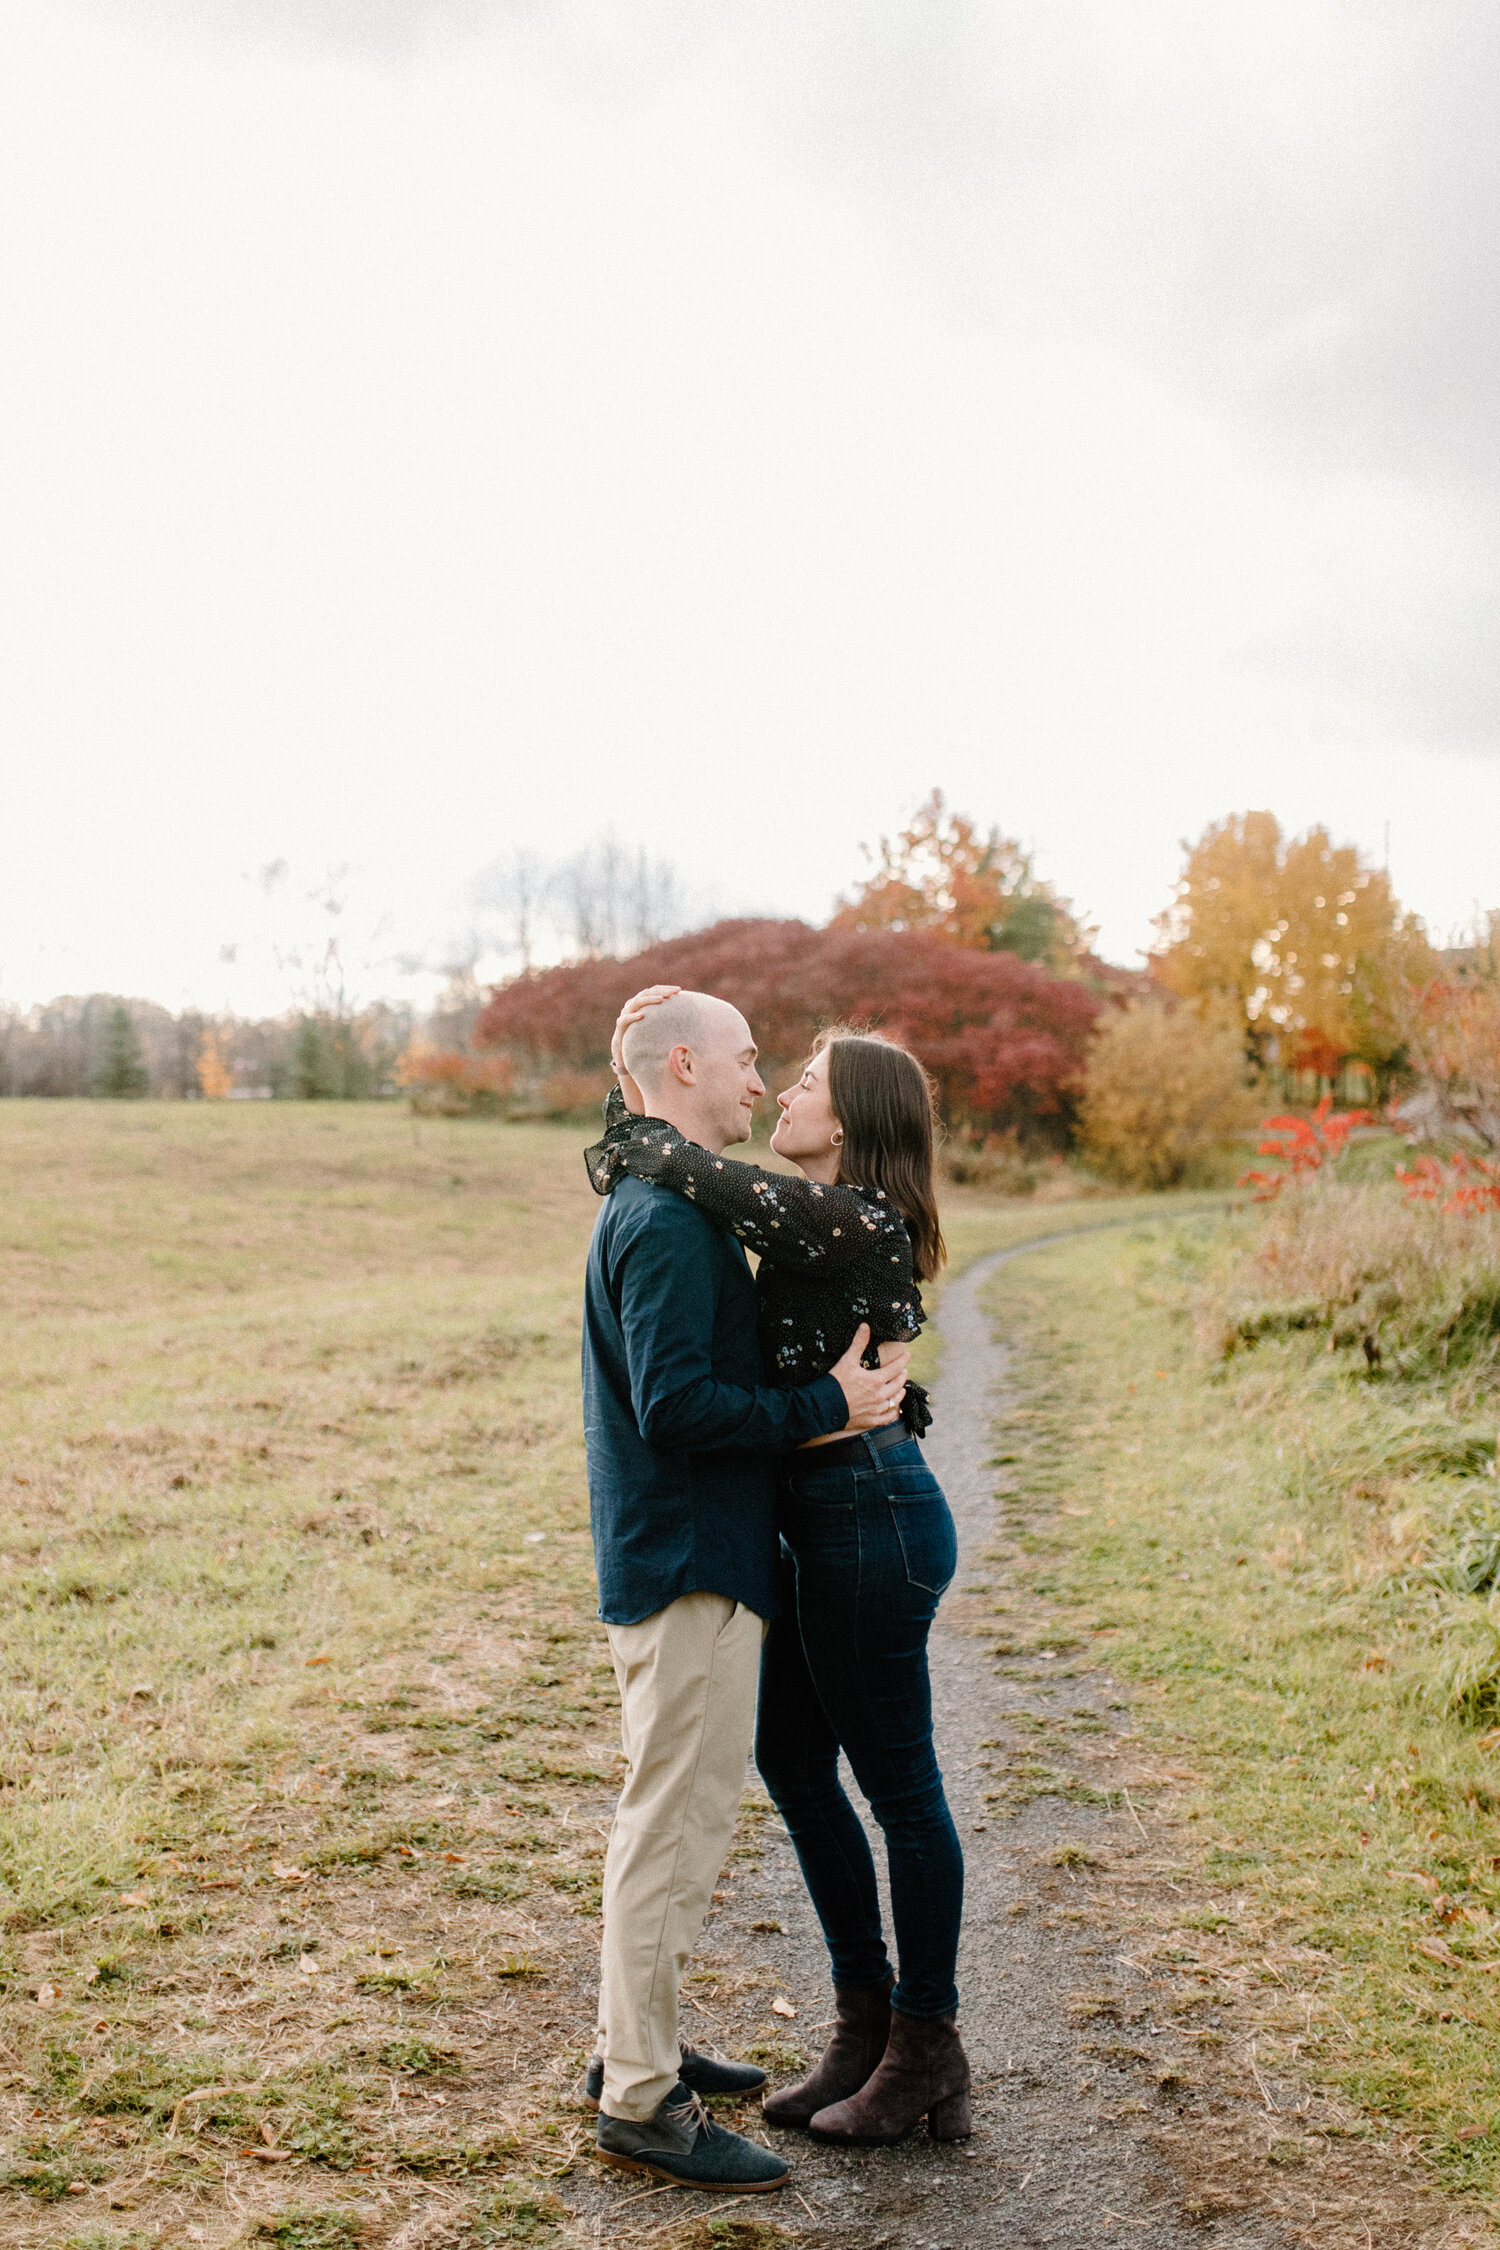  During this autumn engagement session in Ottawa, Canada, Chelsea Mason Photography captures a tender moment between this couple as they wrap their arms around one another. black and denim colored engagement outfit colors, engagement session, autumn 